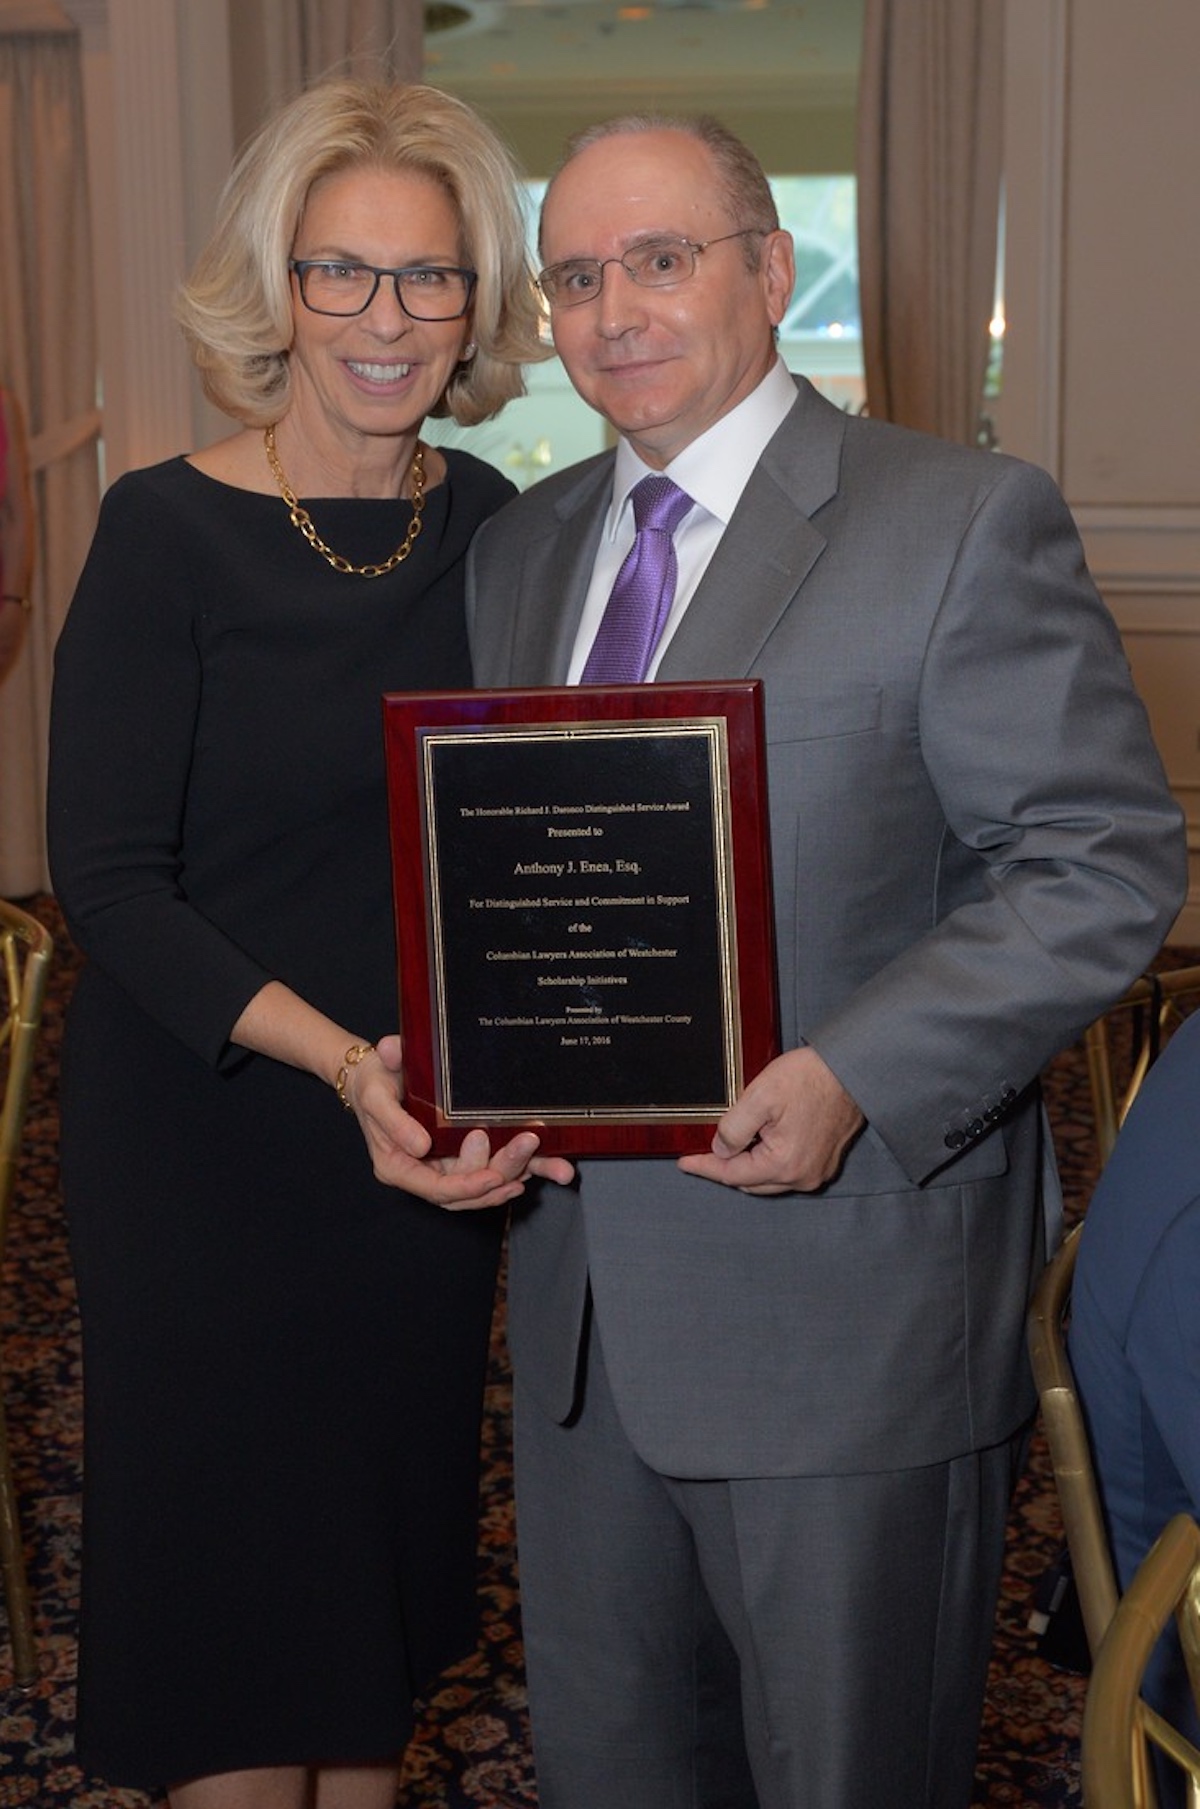 The Hon. Janet DiFiore, Chief Judge of the State of New York and the Court of Appeals, and elder law attorney Anthony J. Enea, recipient of the Hon. Richard J. Daronco Distinguished Service Award